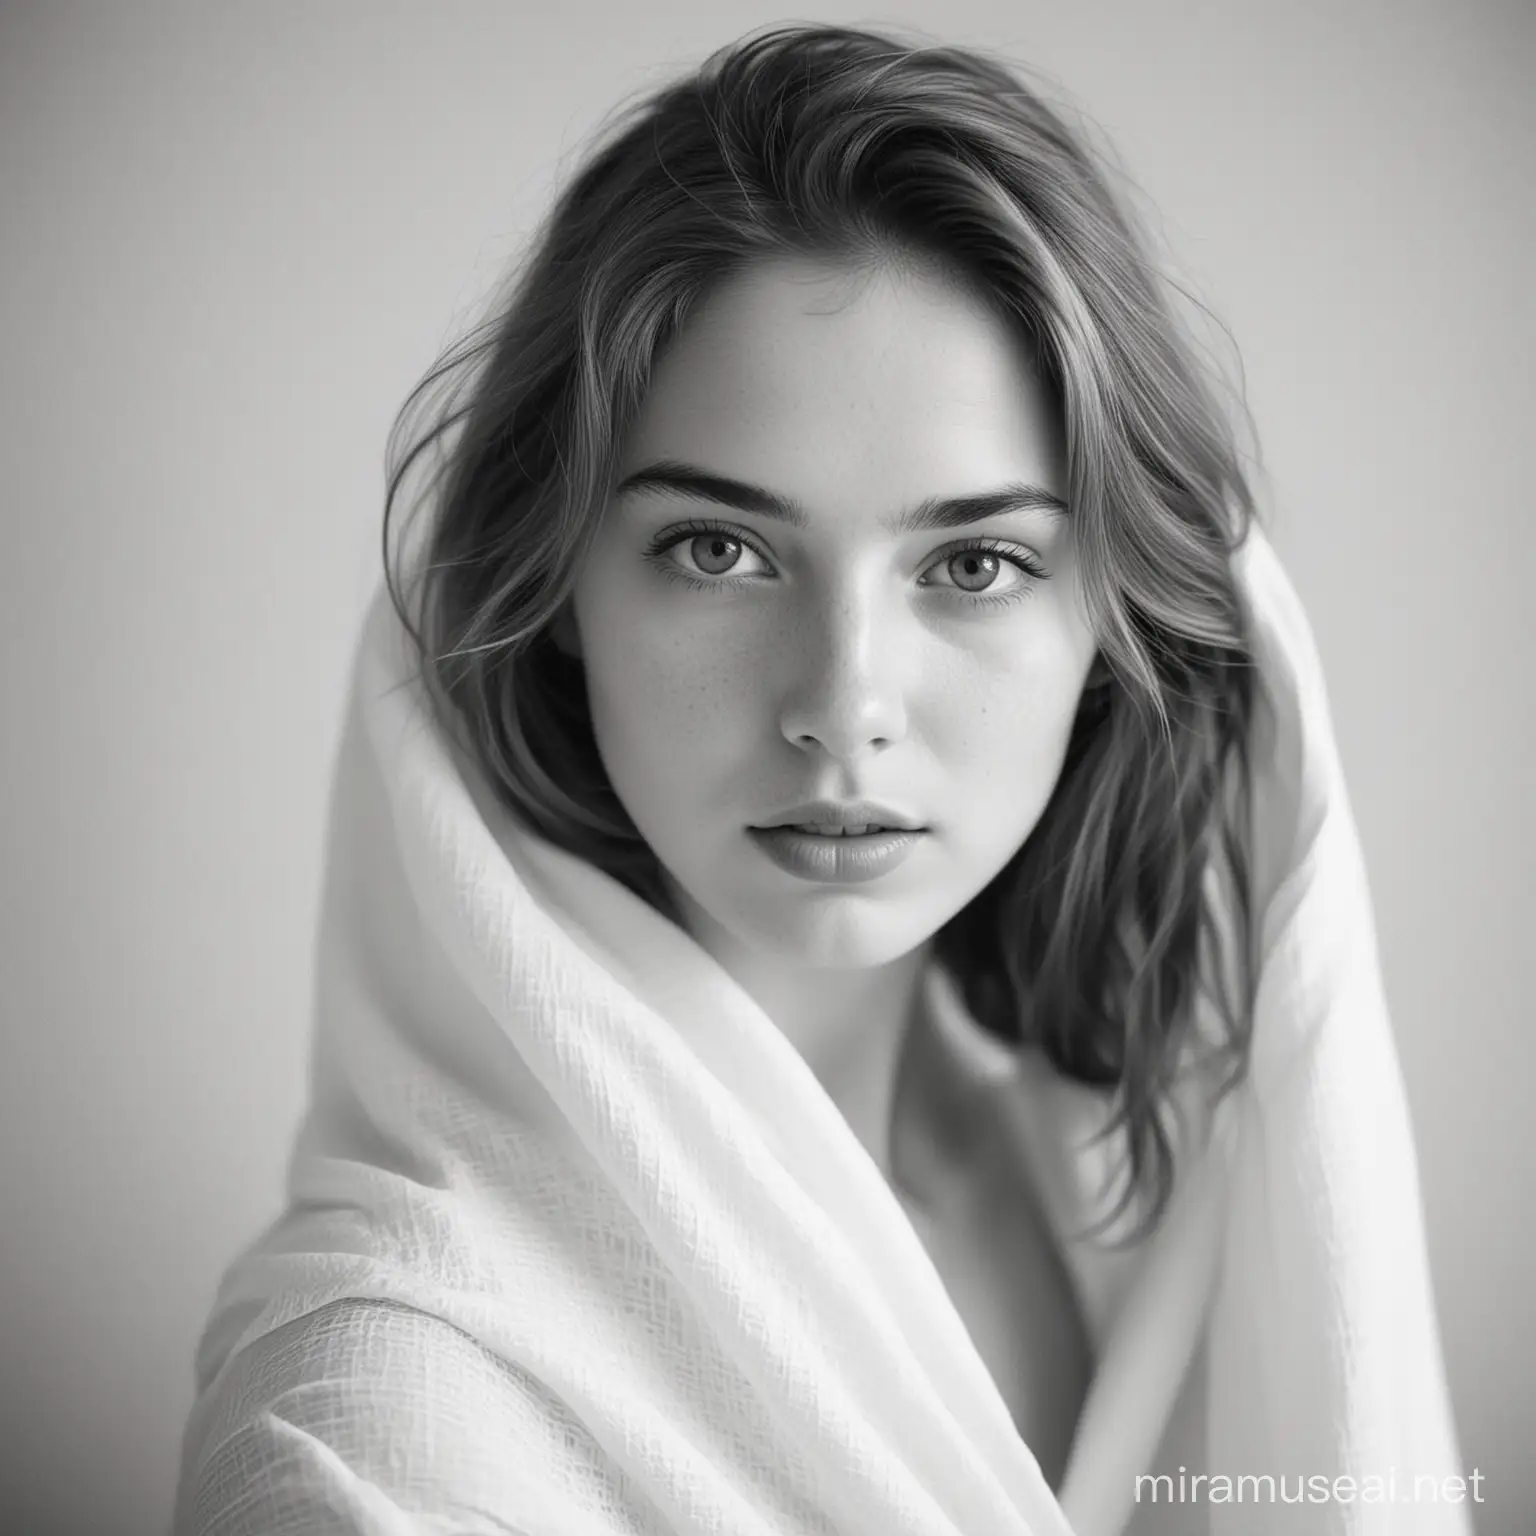 Beautiful Girl Portrait in Black and White with Grain on White Fabric